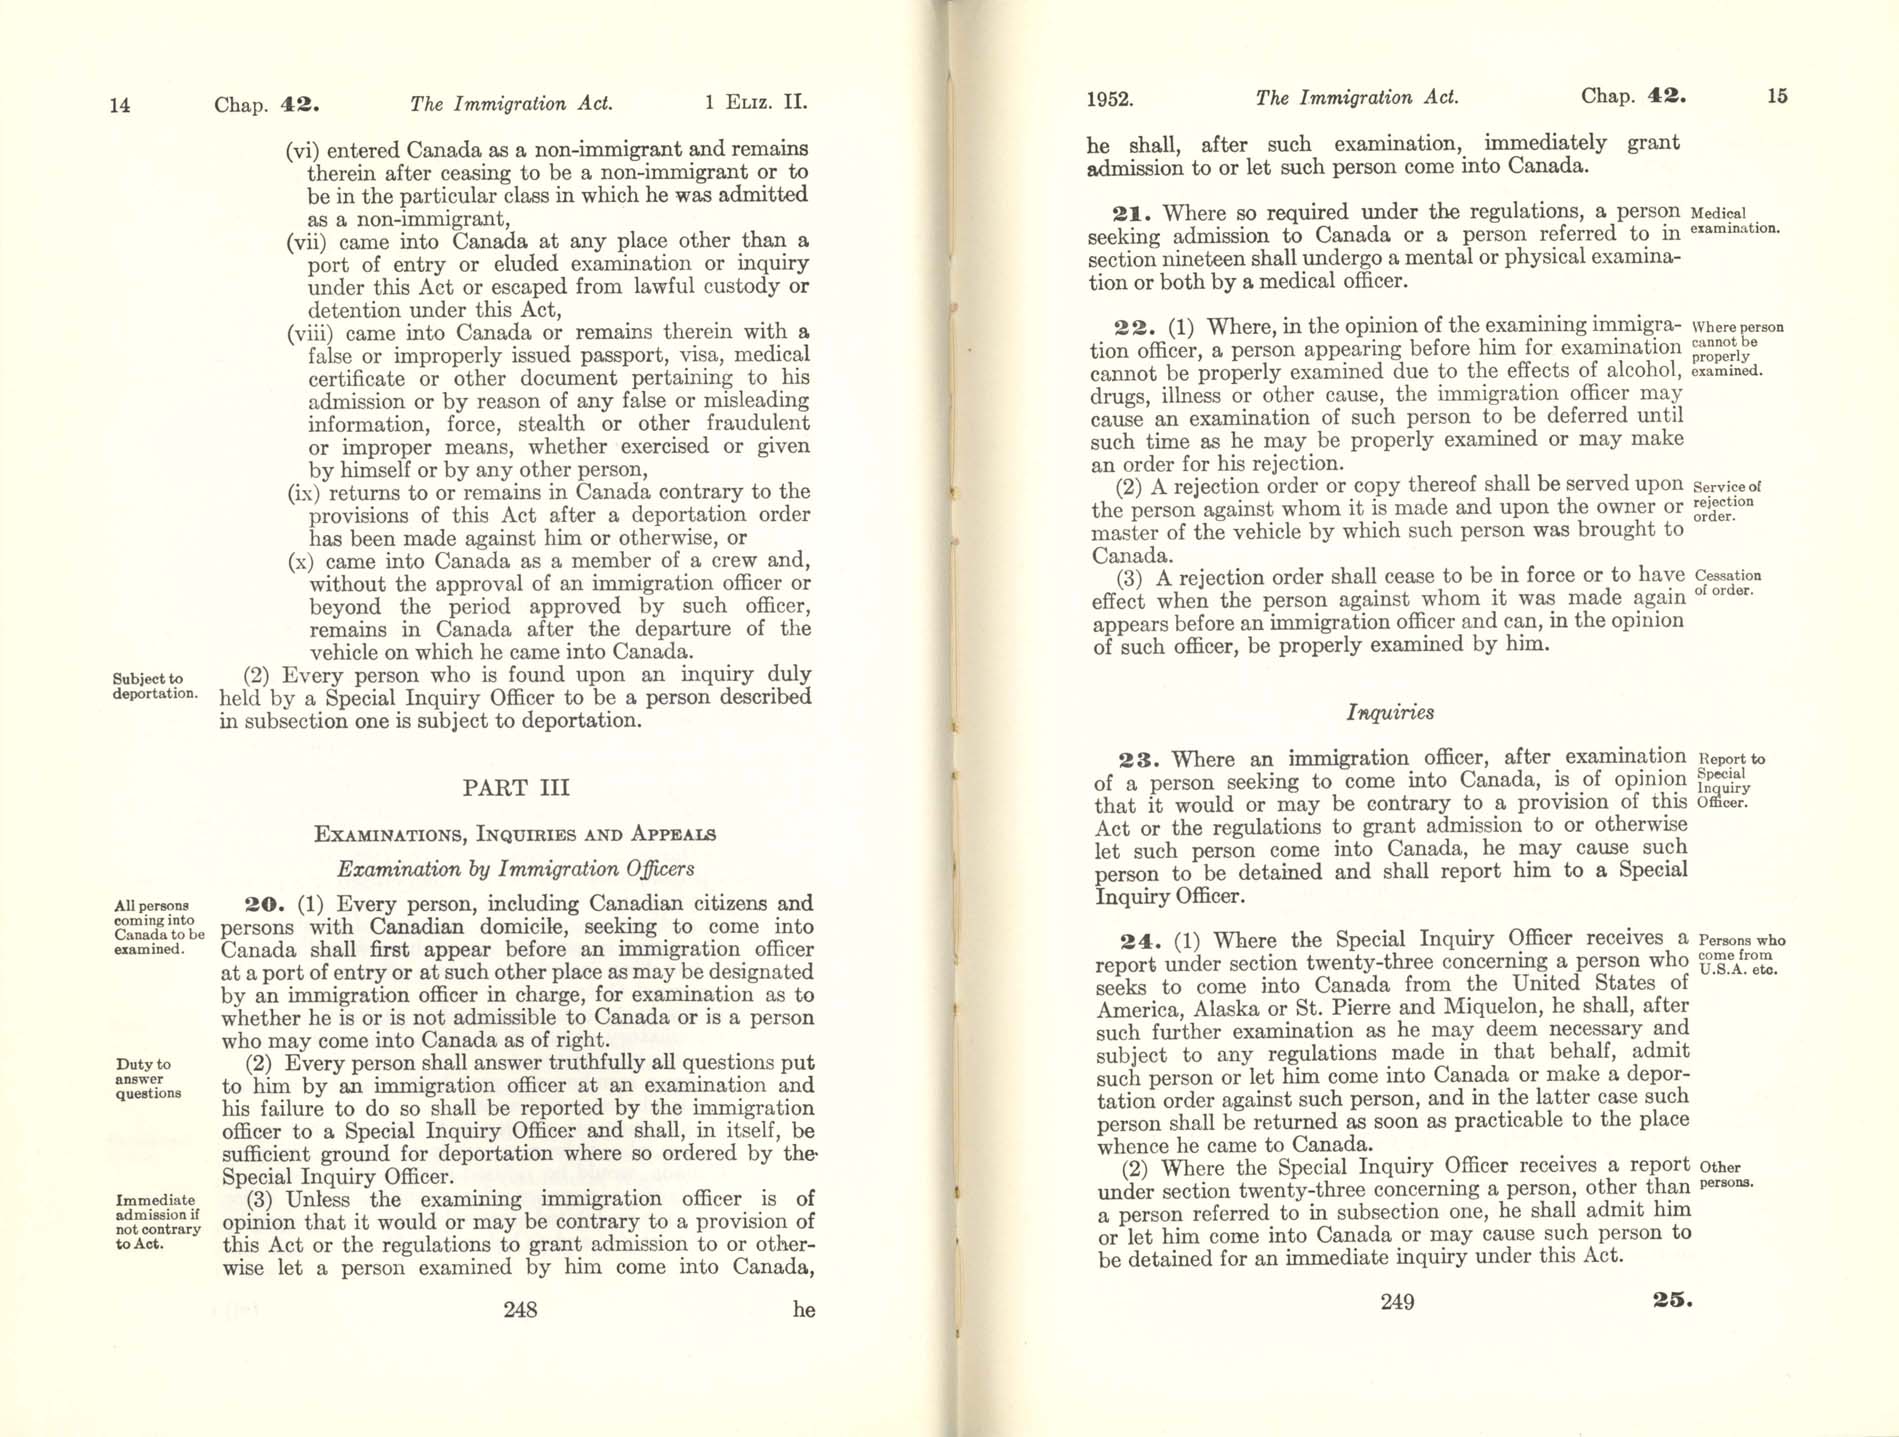 CHAP 42 Page 248, 249 Immigration Act, 1952